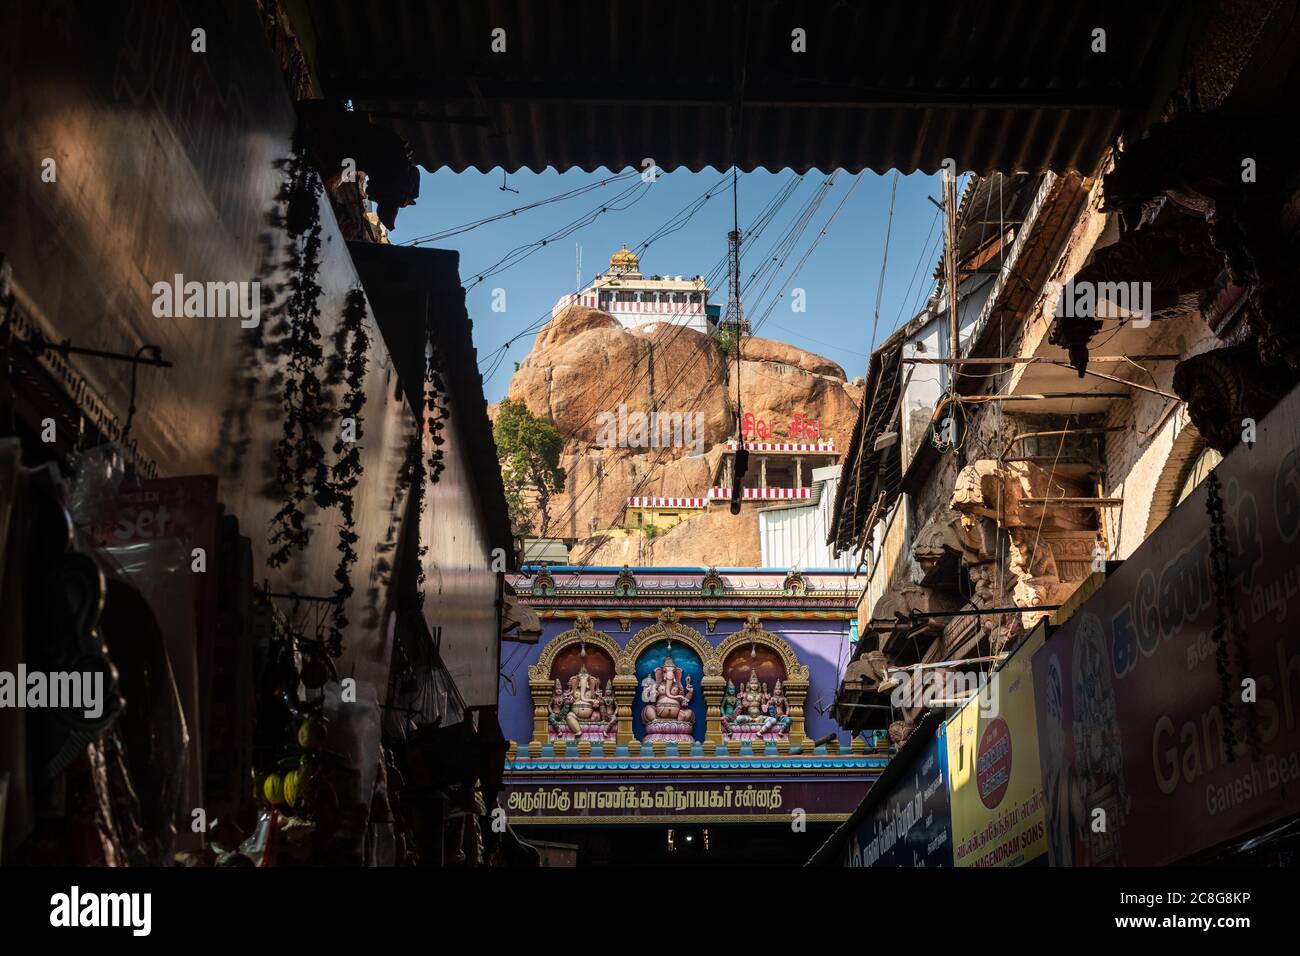 Trichy, Tamil Nadu, India - February 2020: The ancient hill top Rock Fort temple also known as the Ucchi Pillaiyar temple in the city of Tiruchirappal Stock Photo